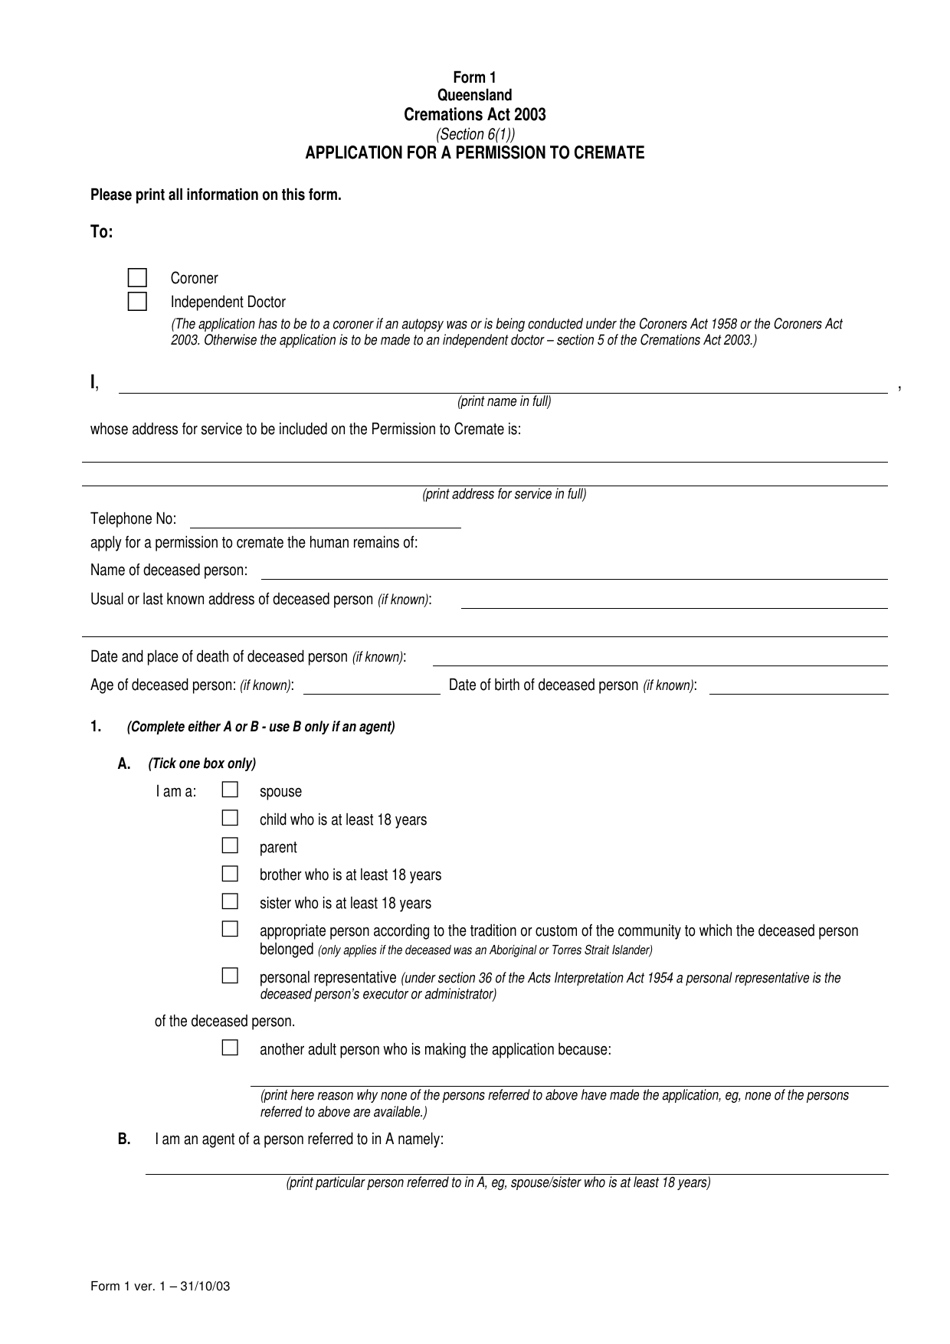 Form 1 Application for a Permission to Cremate - Queensland, Australia, Page 1